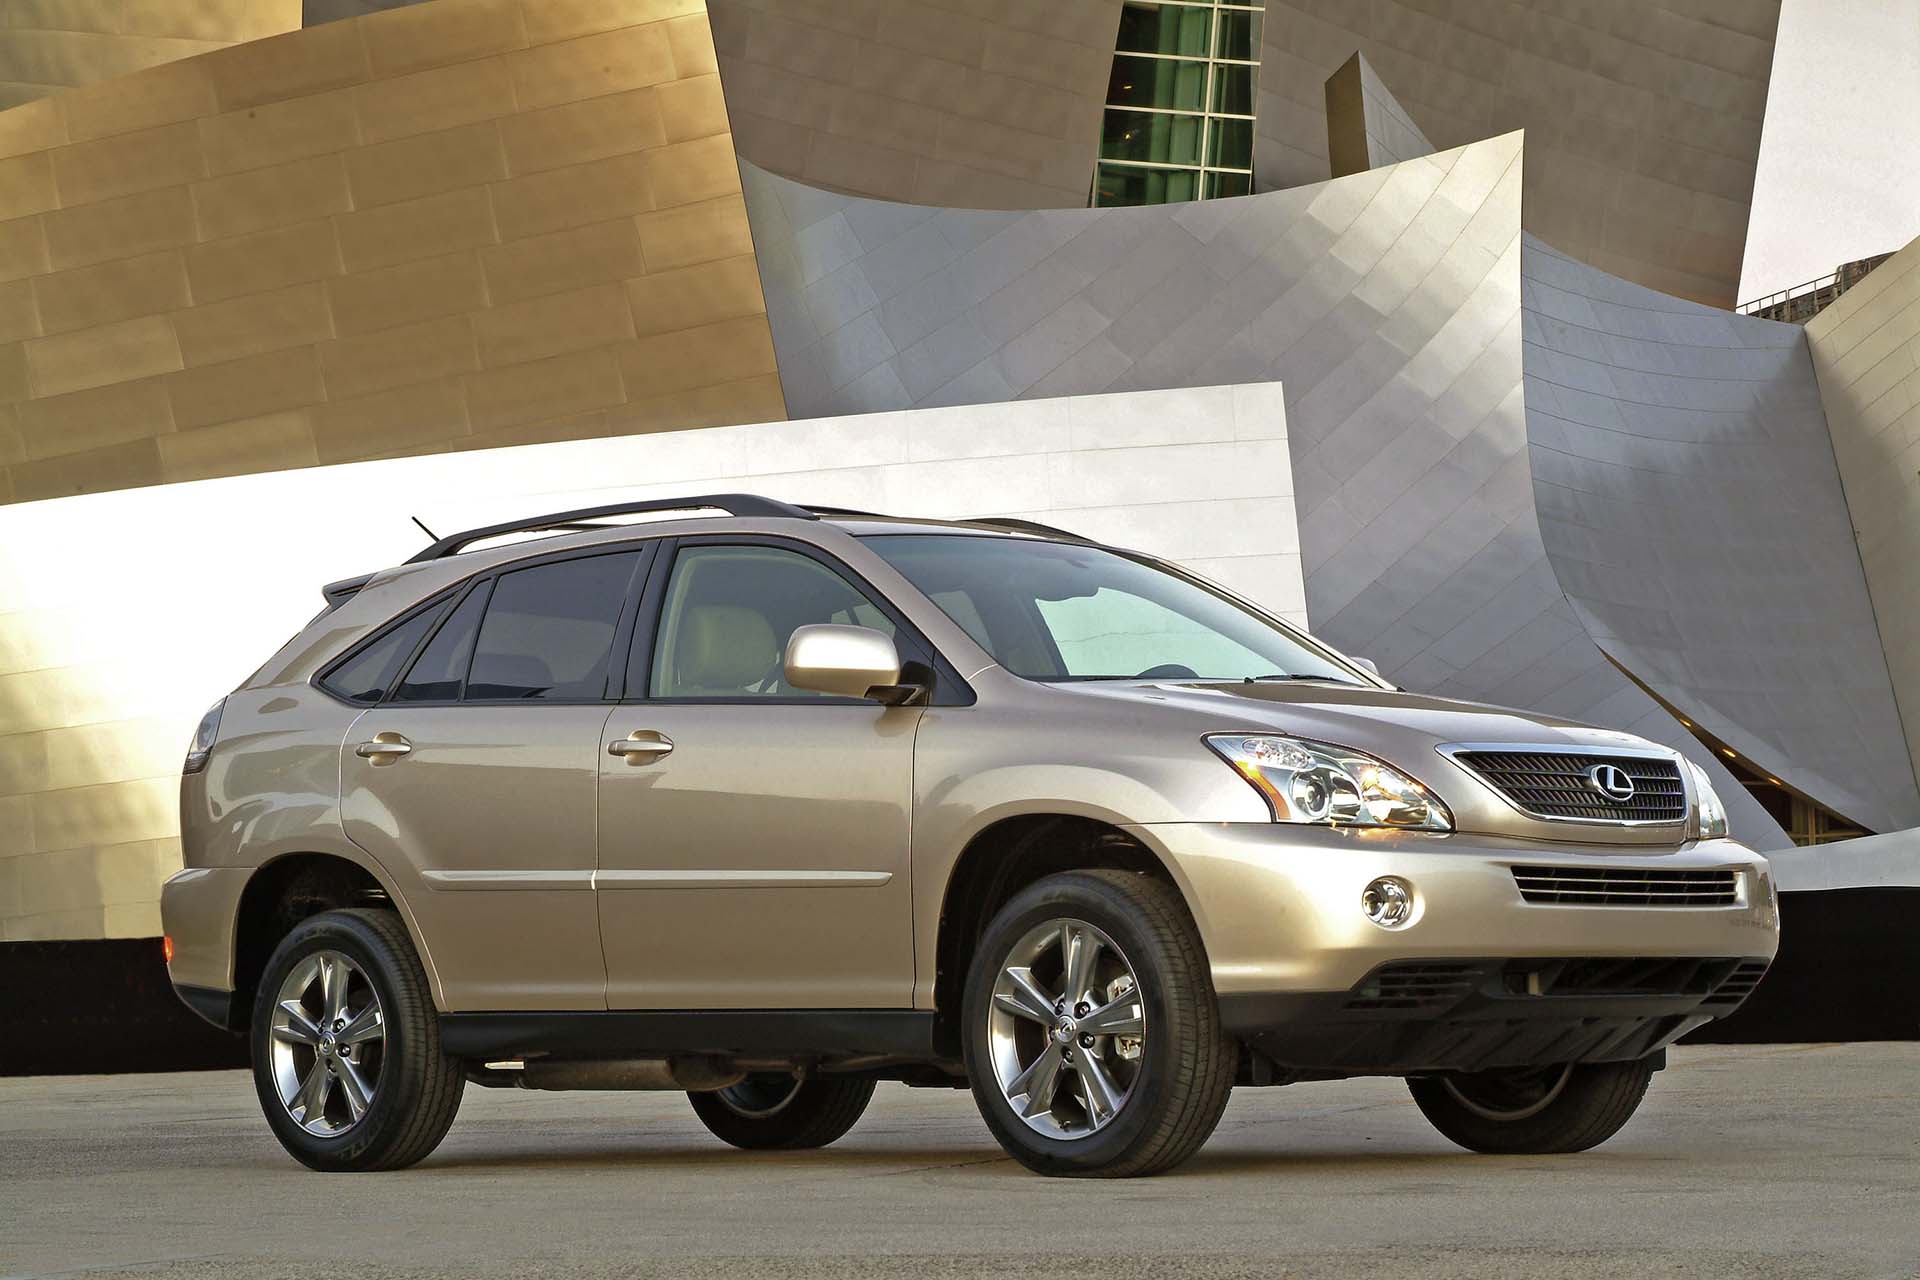 The second-generation RX was already slipperier than the debut model, and had a coefficient of drag of just 0.35 – excellent for a mid-sized SUV. However, more could be done, especially for urban dwellers. In 2004, Lexus launched a hybridized version of the RX, which took proven V6 power and added Toyota's hybrid drive system.